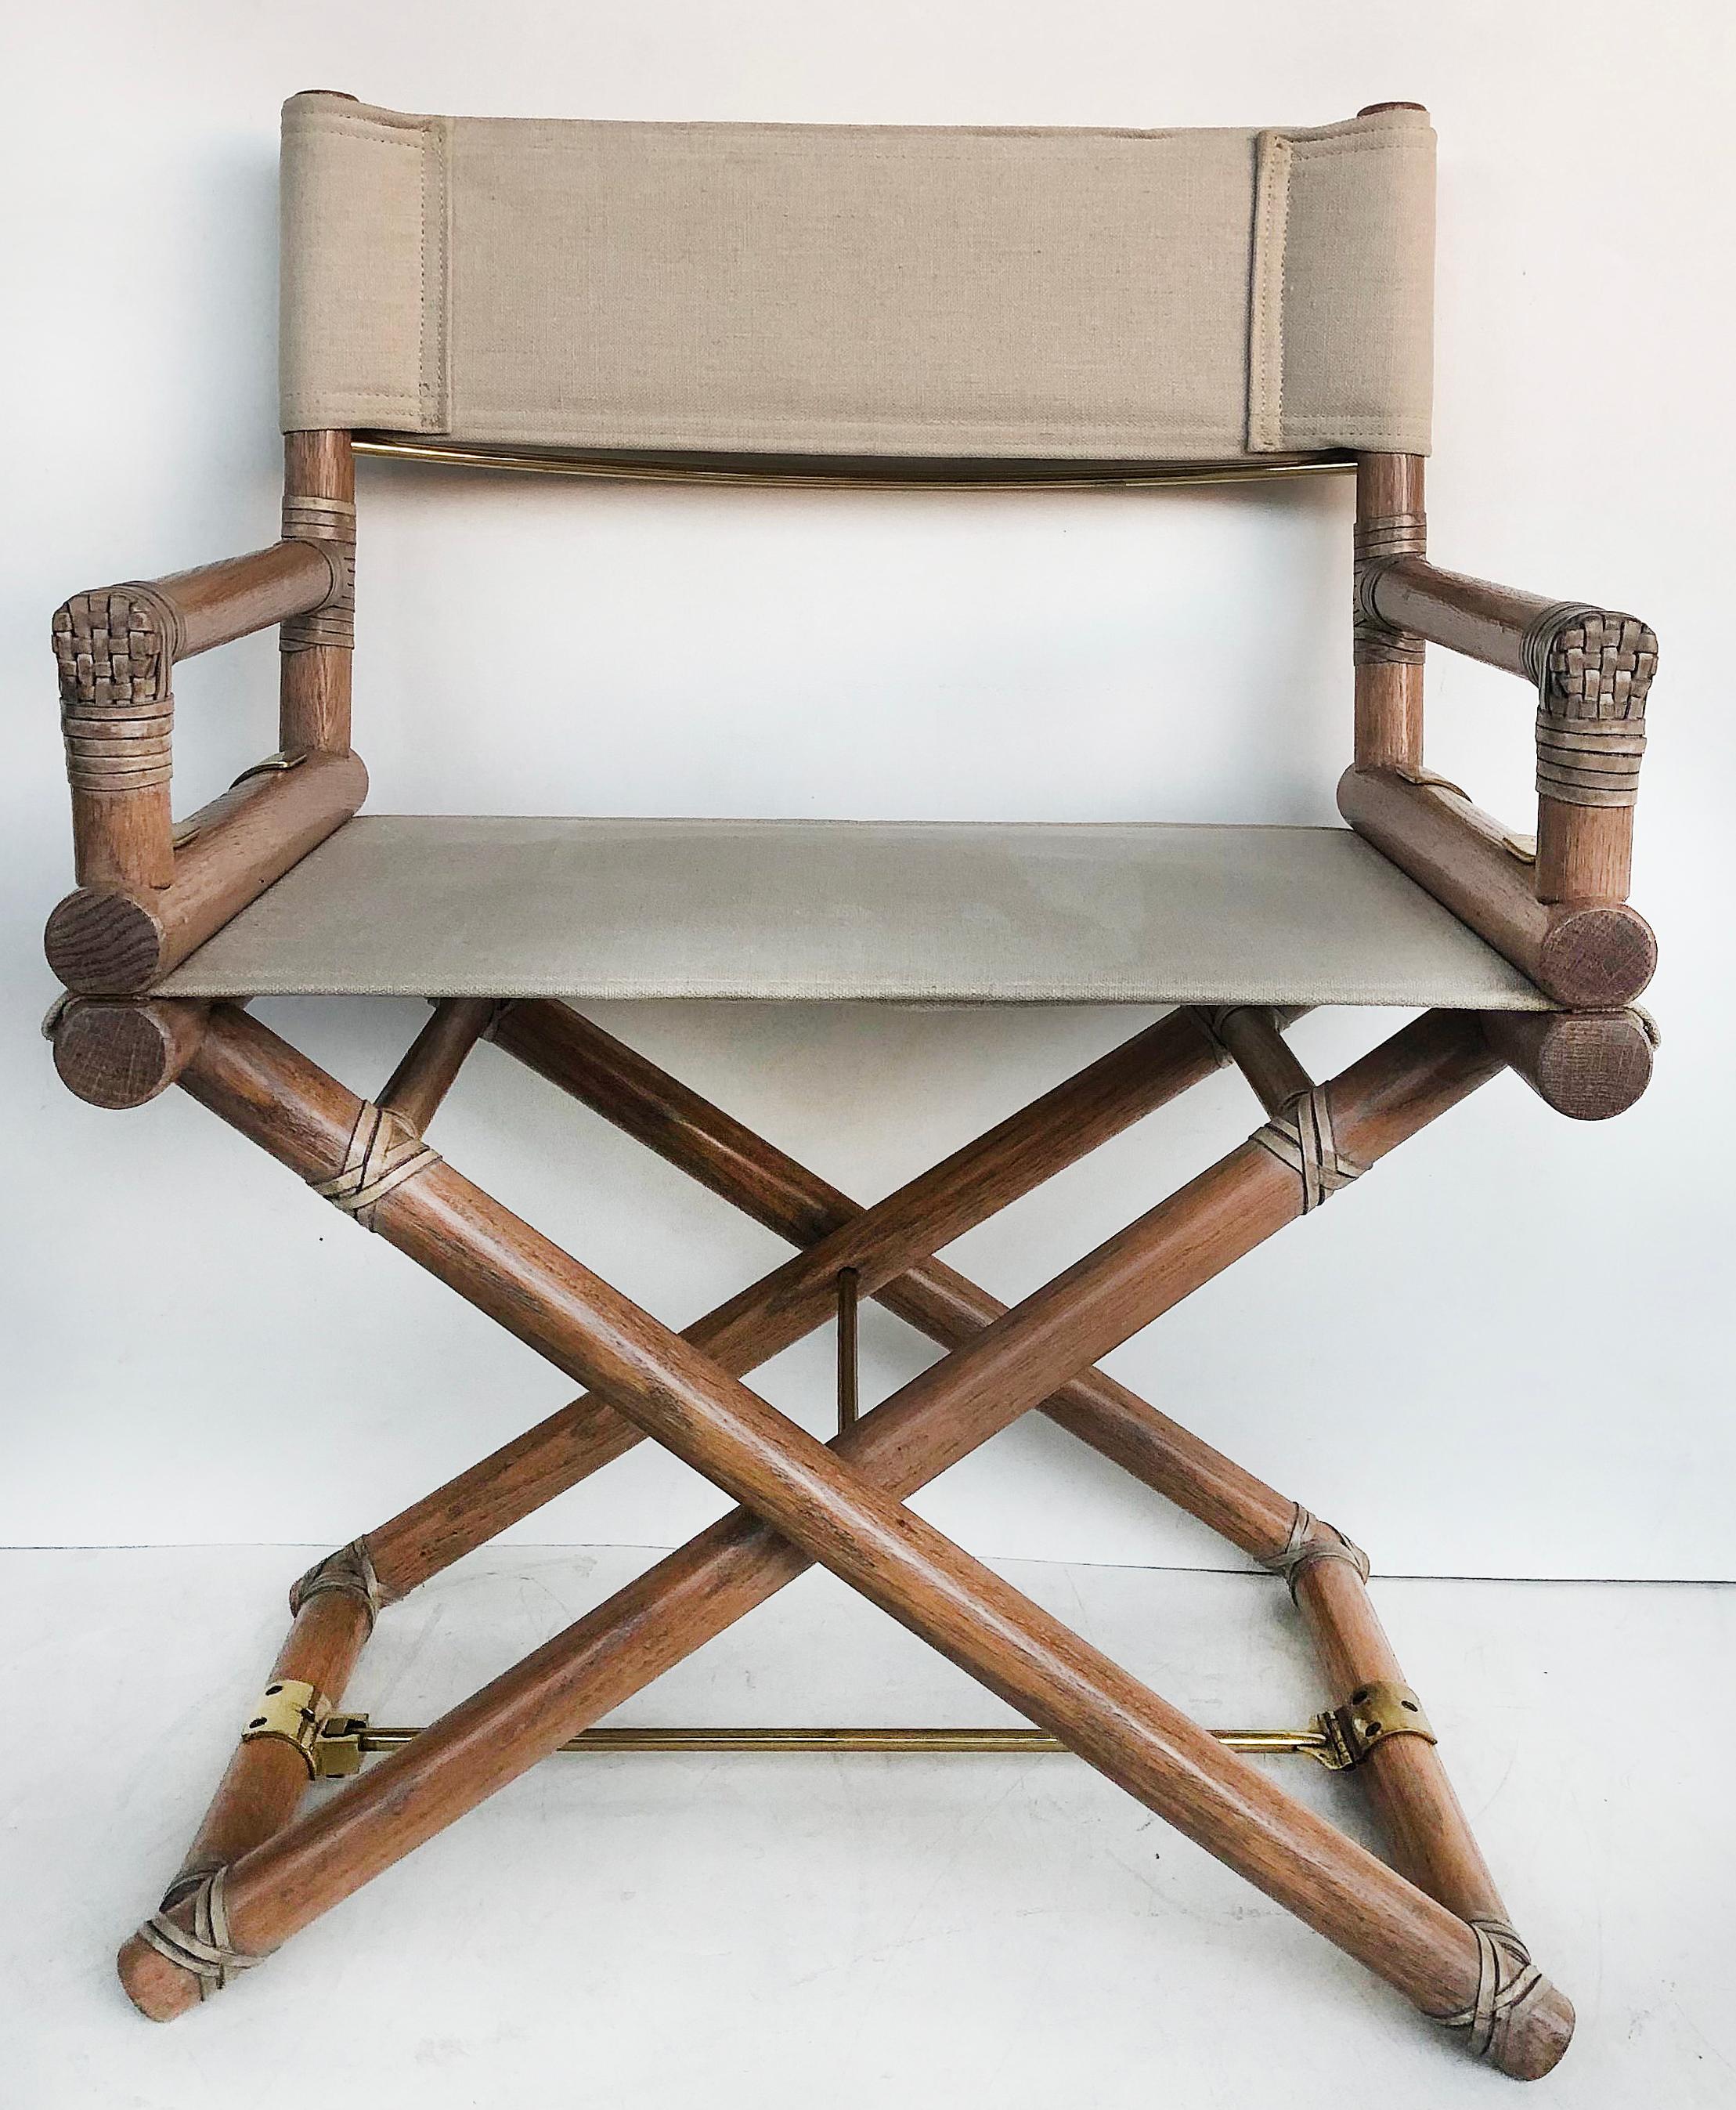 McGuire Furniture of San Francisco Director's Chairs in Oak, Leather & Brass

Offered for sale is a fine quality pair of oak, leather, and brass director's chairs. The director chairs were first designed by Leonard Linden for John & Elinor McGuire